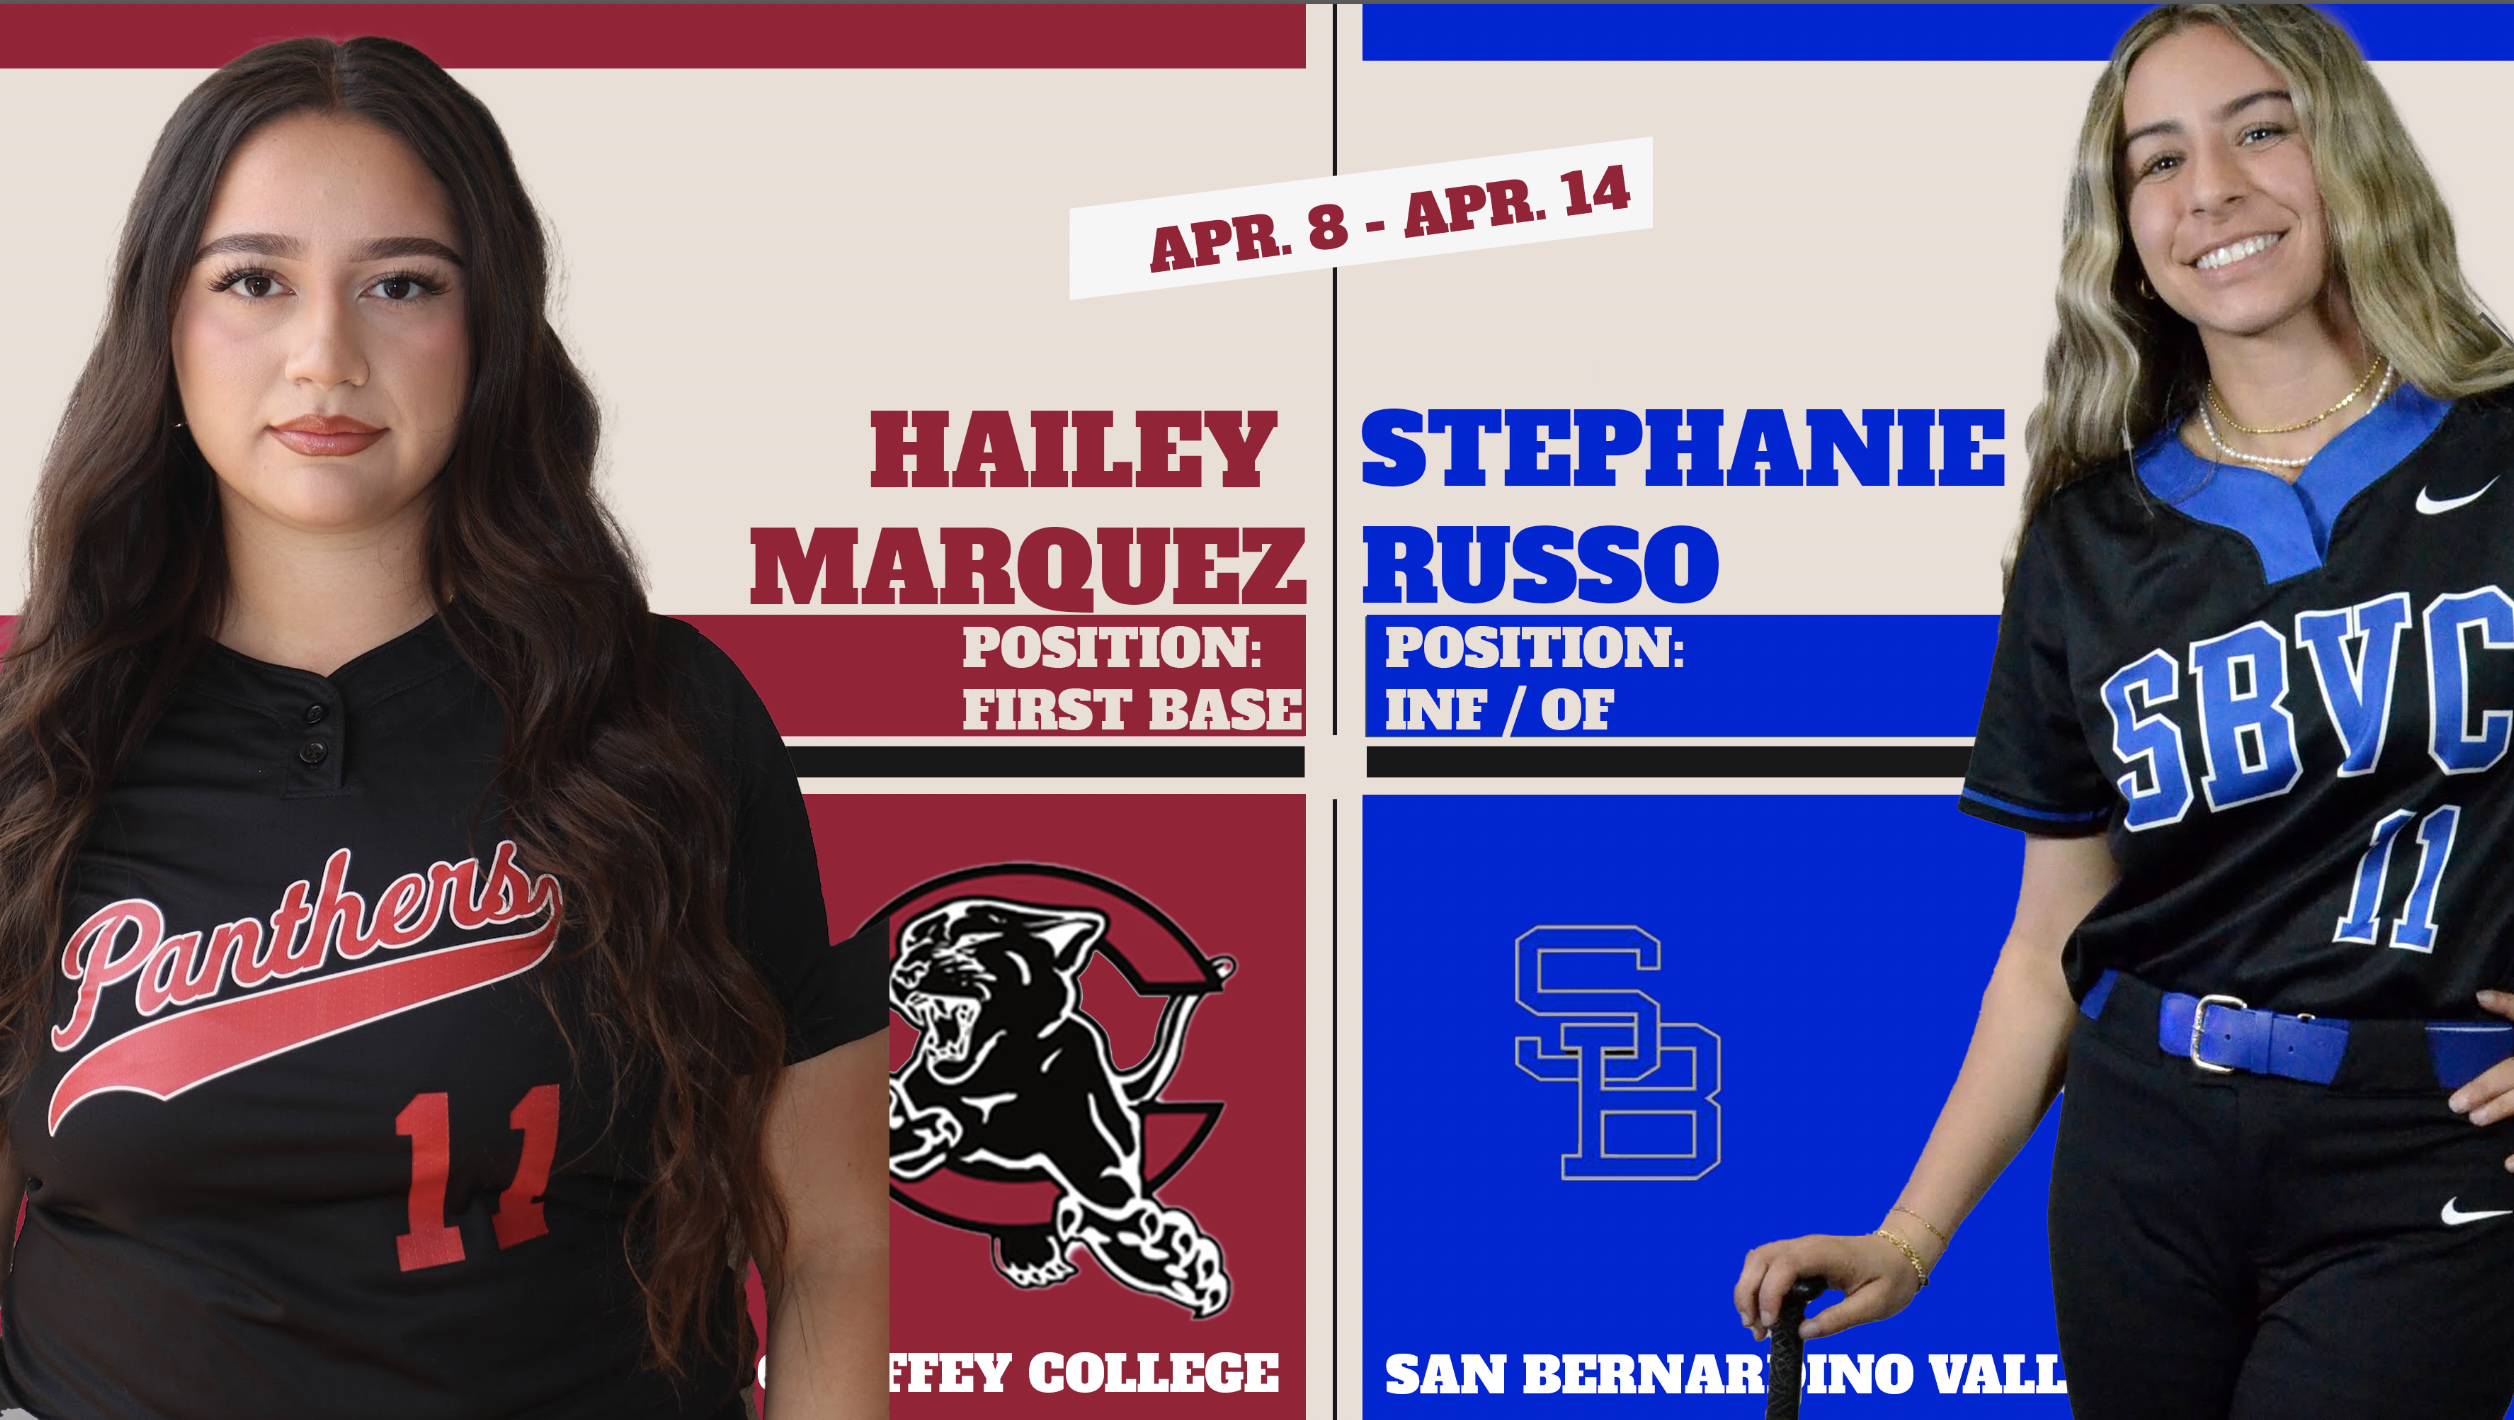 IEAC Softball Players of the Week Apr. 8 - Apr. 14